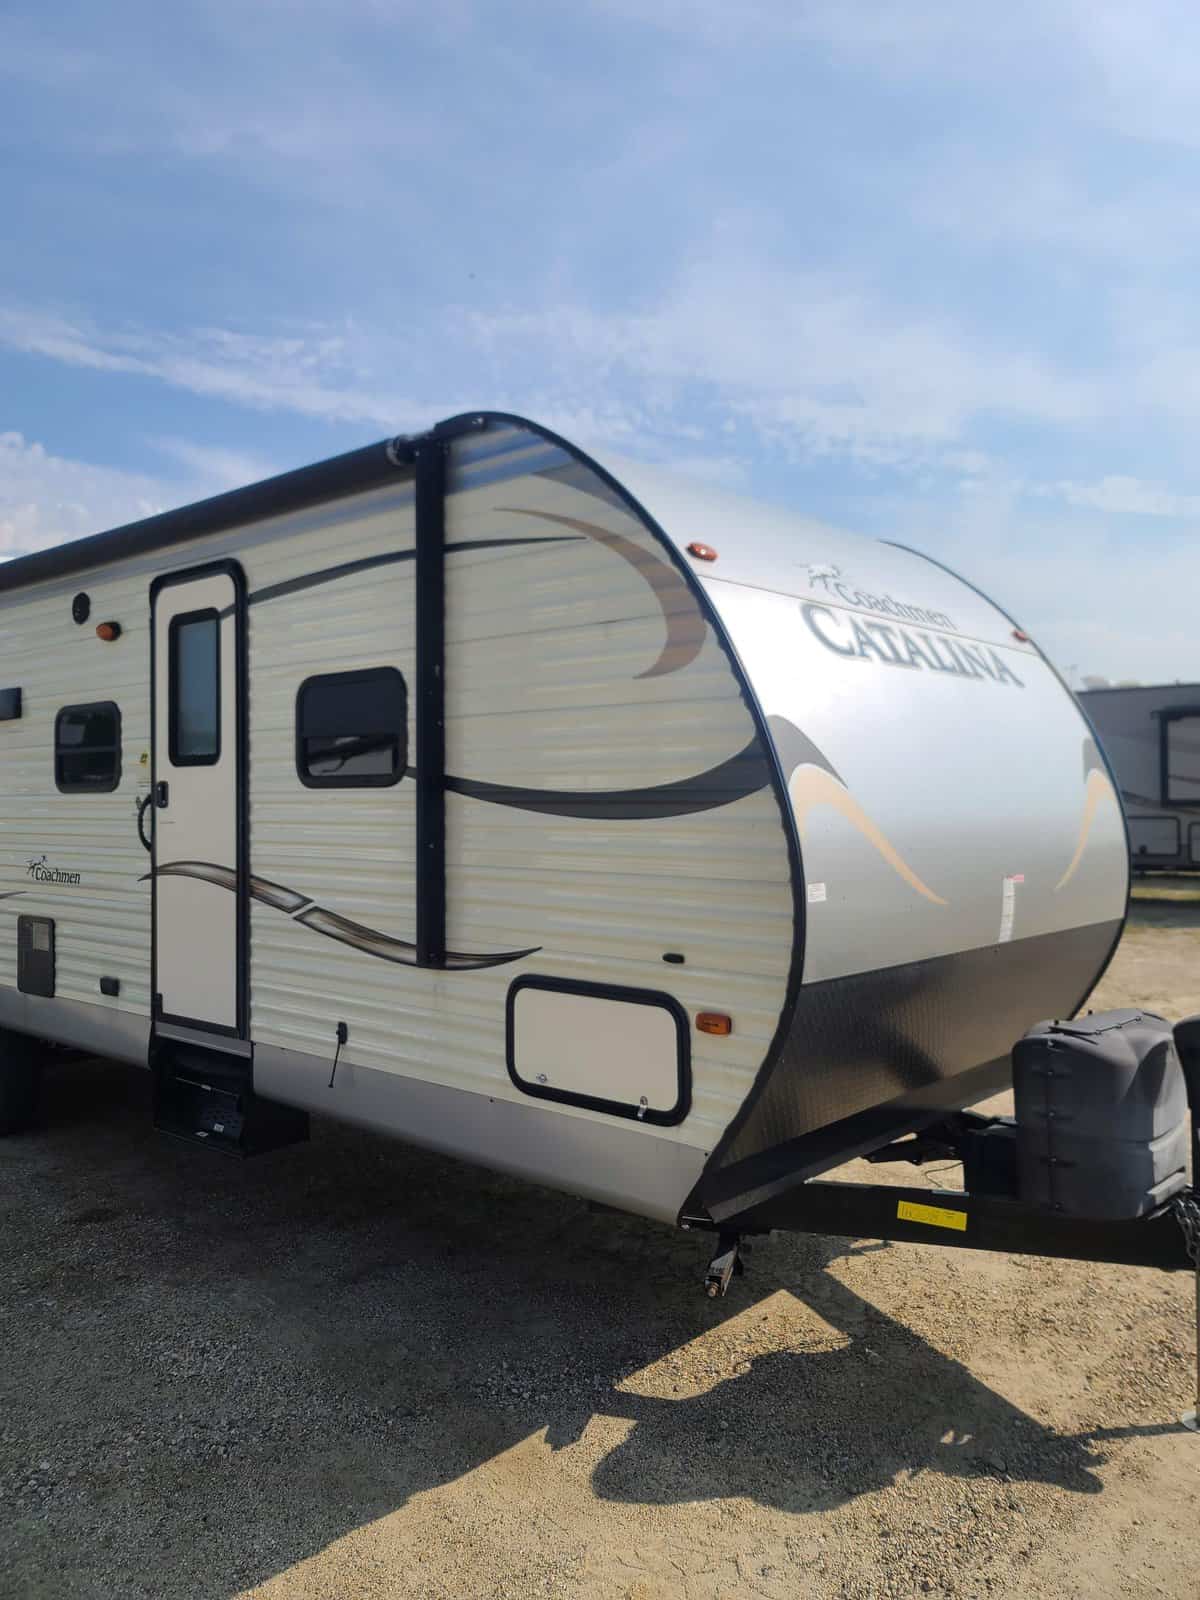 USED 2015 Forest River CATALINA 293 QBCK